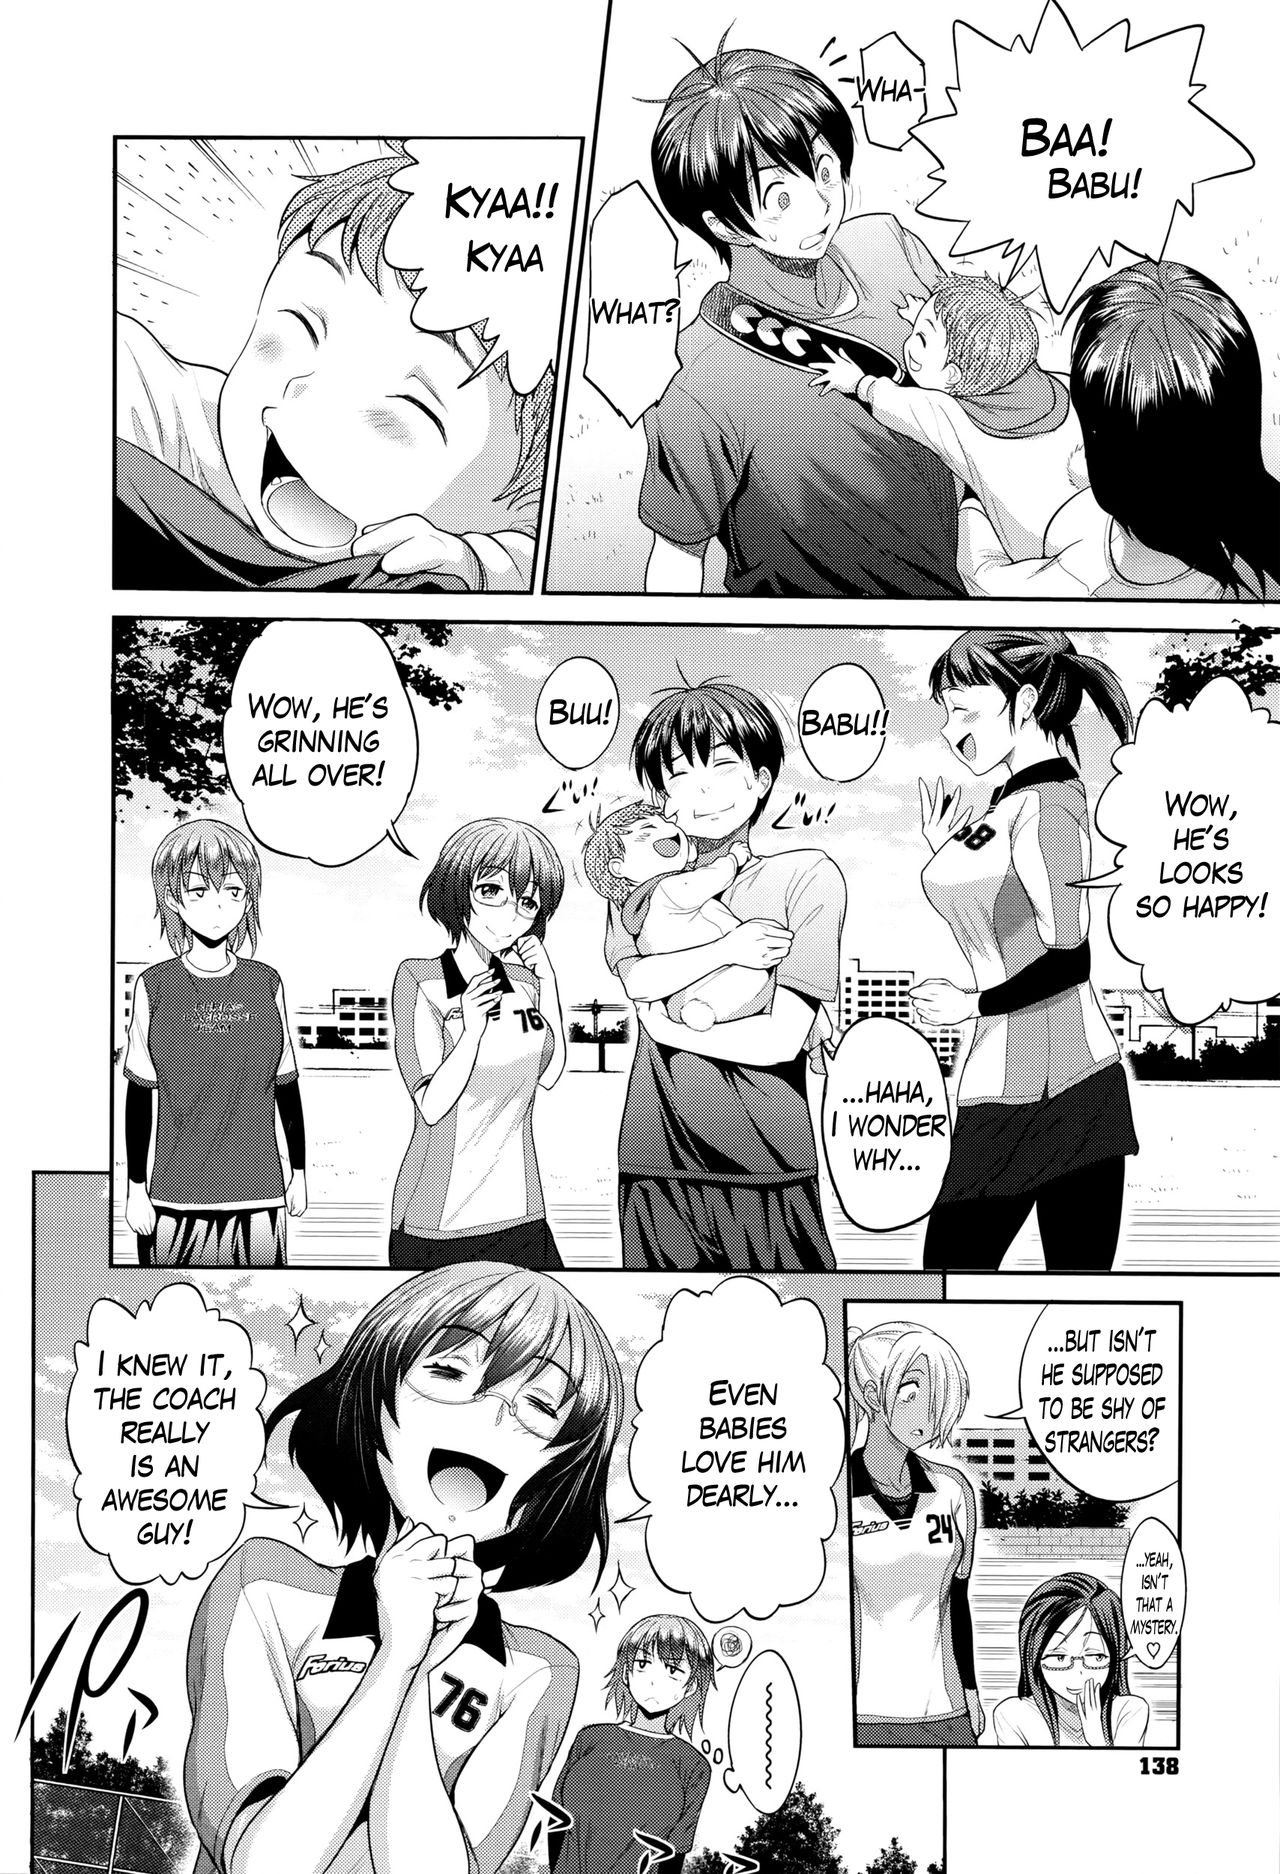 [DISTANCE] Joshi Lacu! - Girls Lacrosse Club ~2 Years Later~ Ch. 0 (COMIC ExE 01) [English] [TripleSevenScans] [DISTANCE] じょしラク！～2Years Later～ 第0話 (コミック エグゼ 01) [英訳]